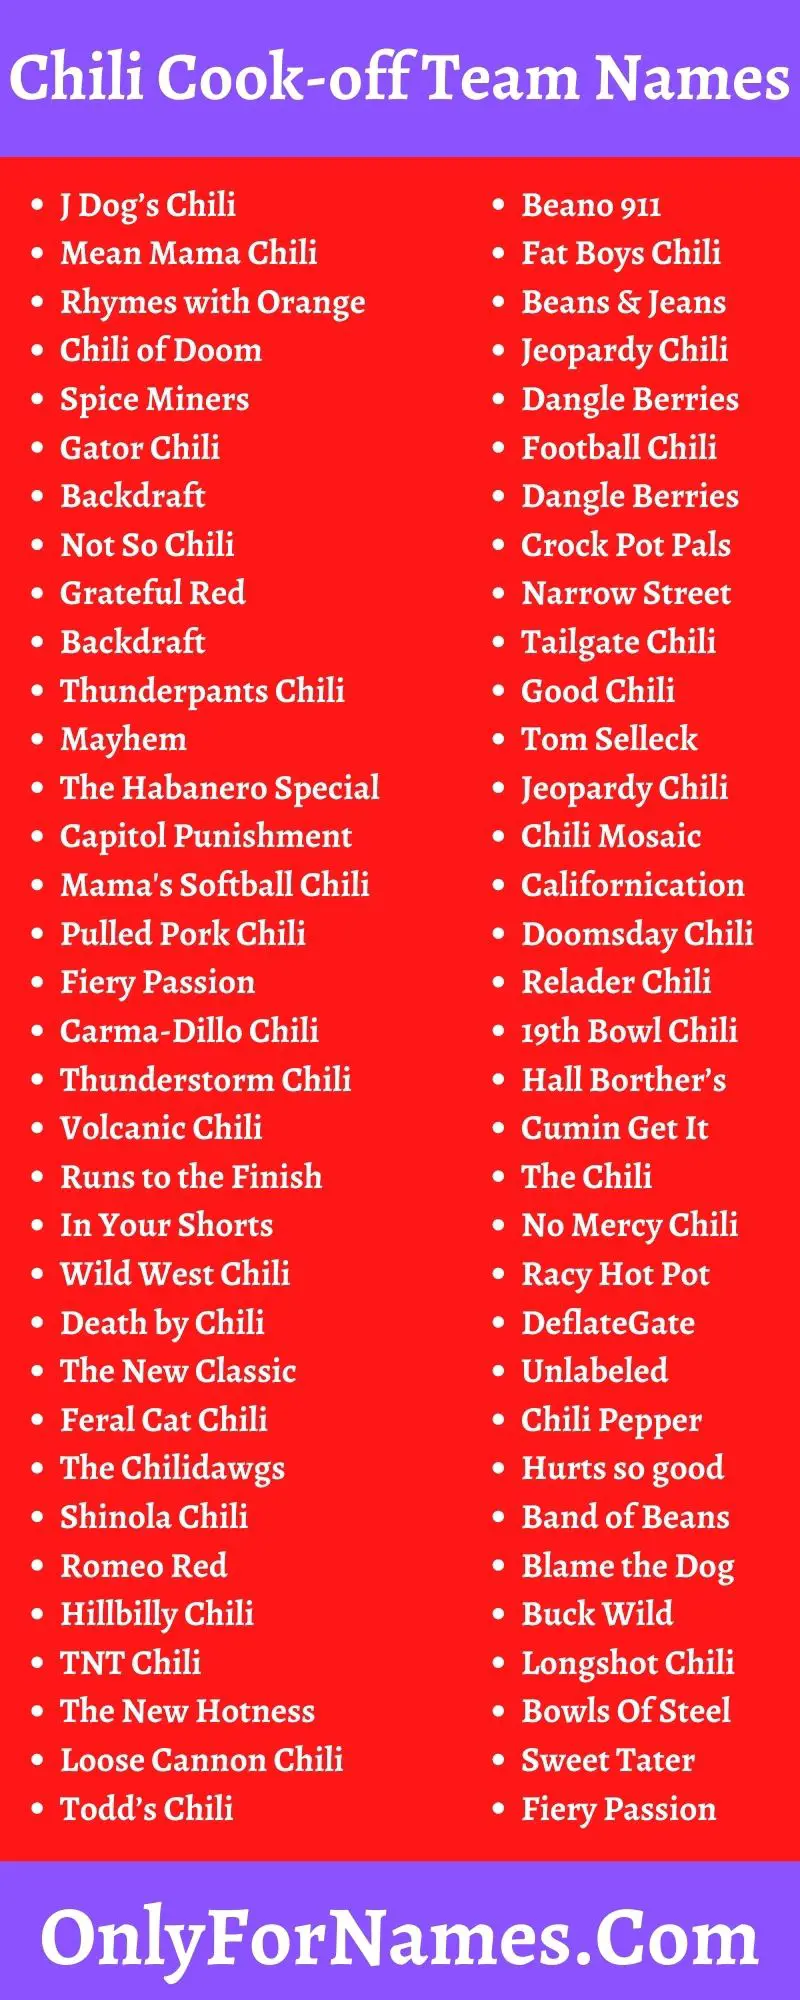 Chili Cook-off Team Names